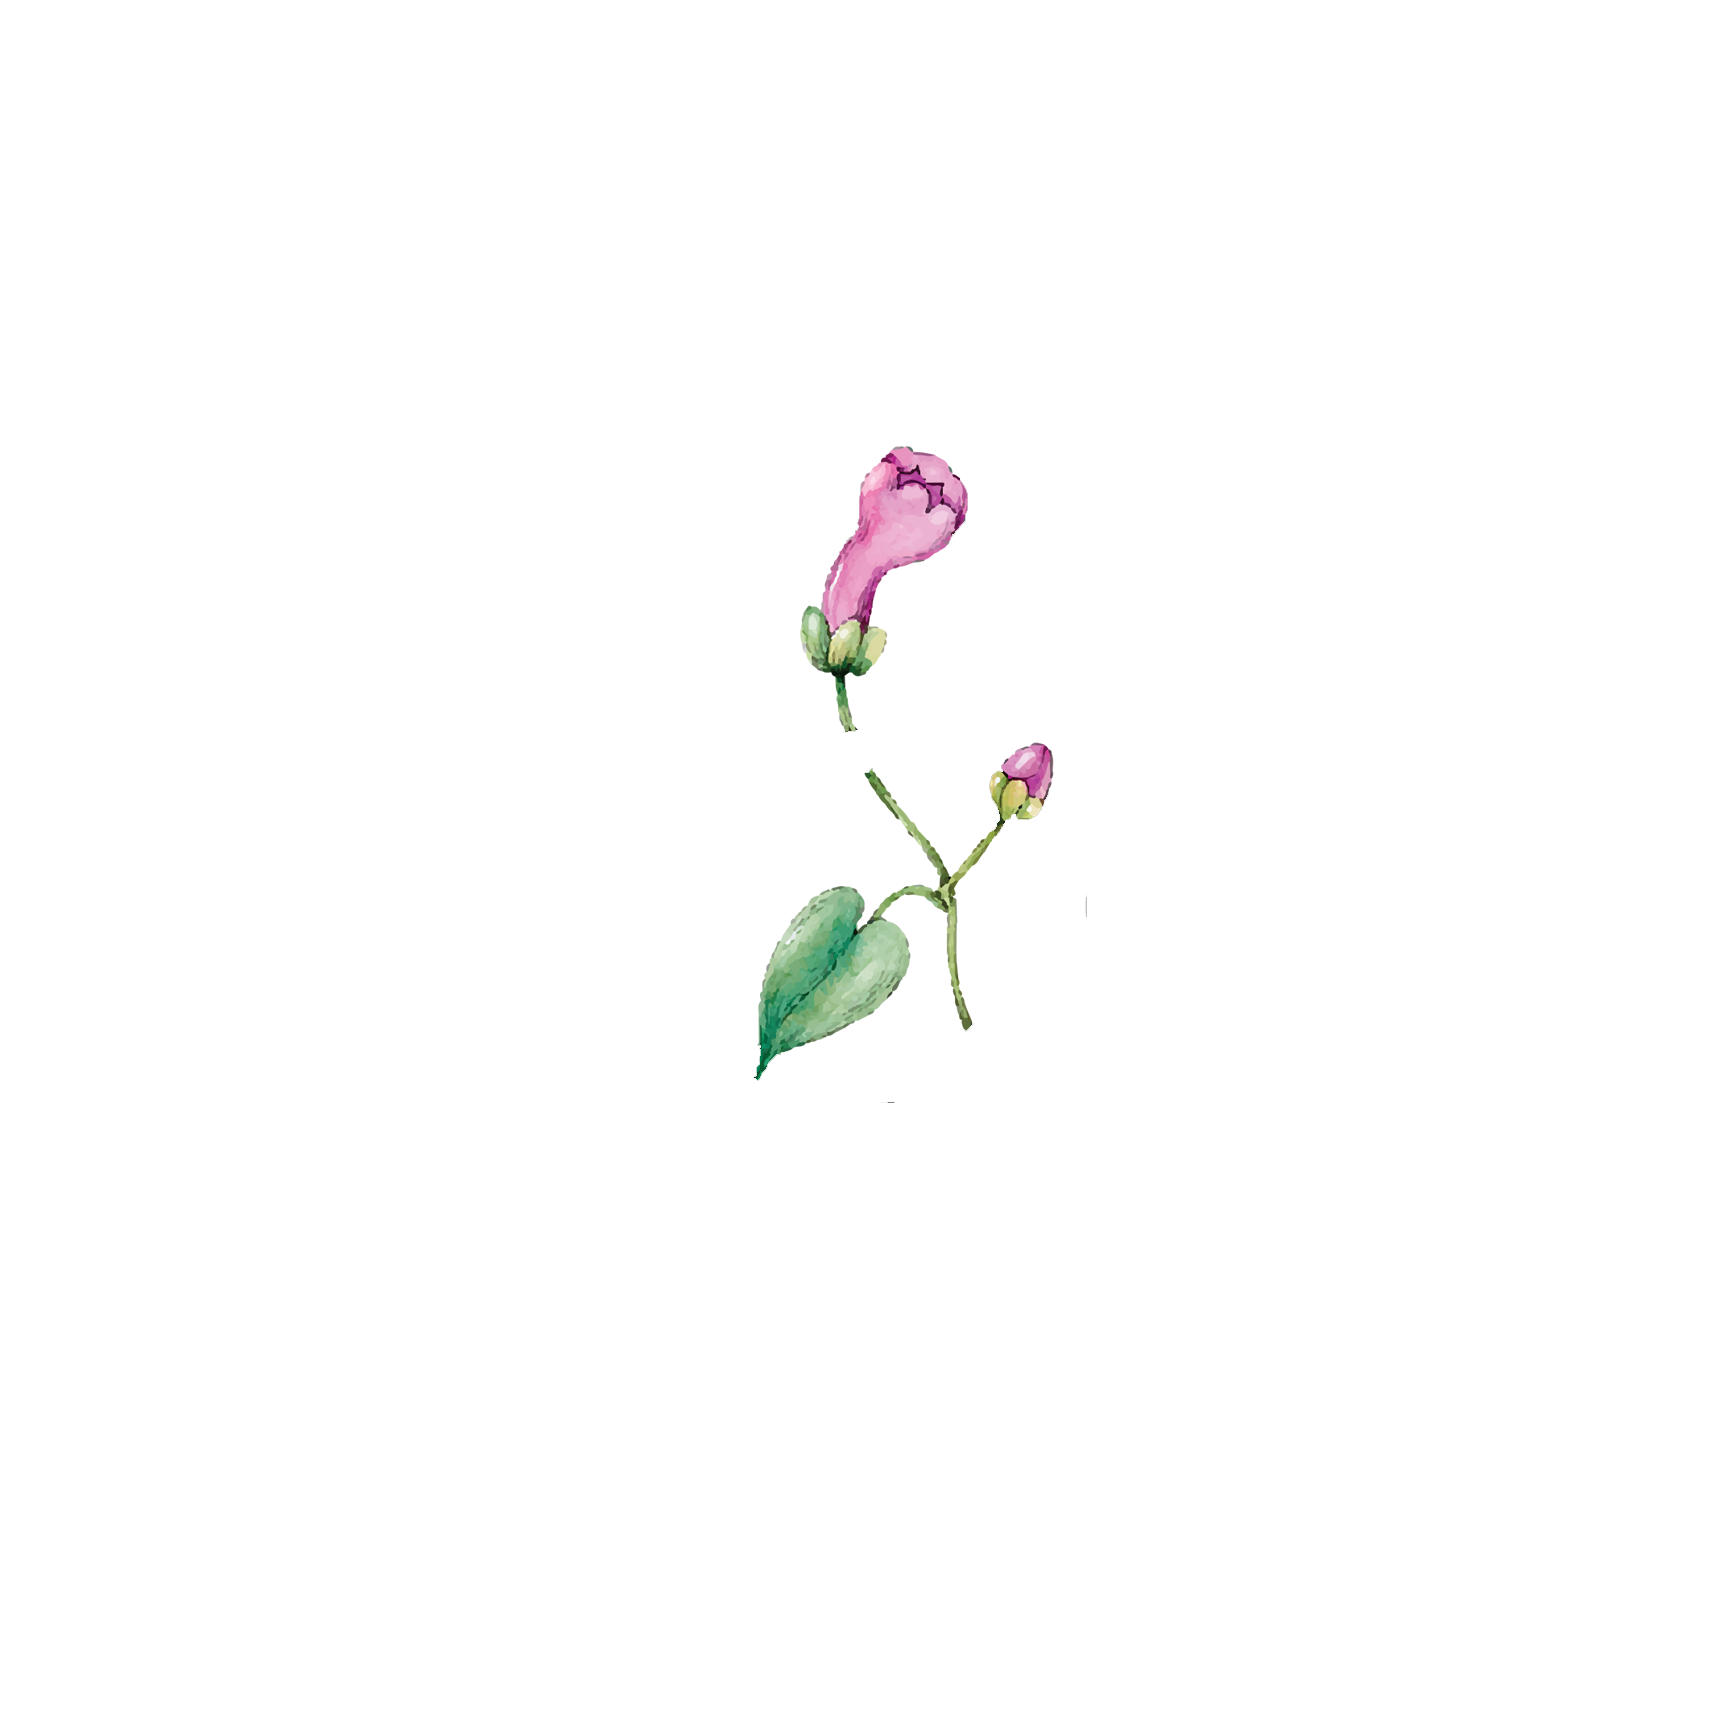 Click to read Day 5 - Movement